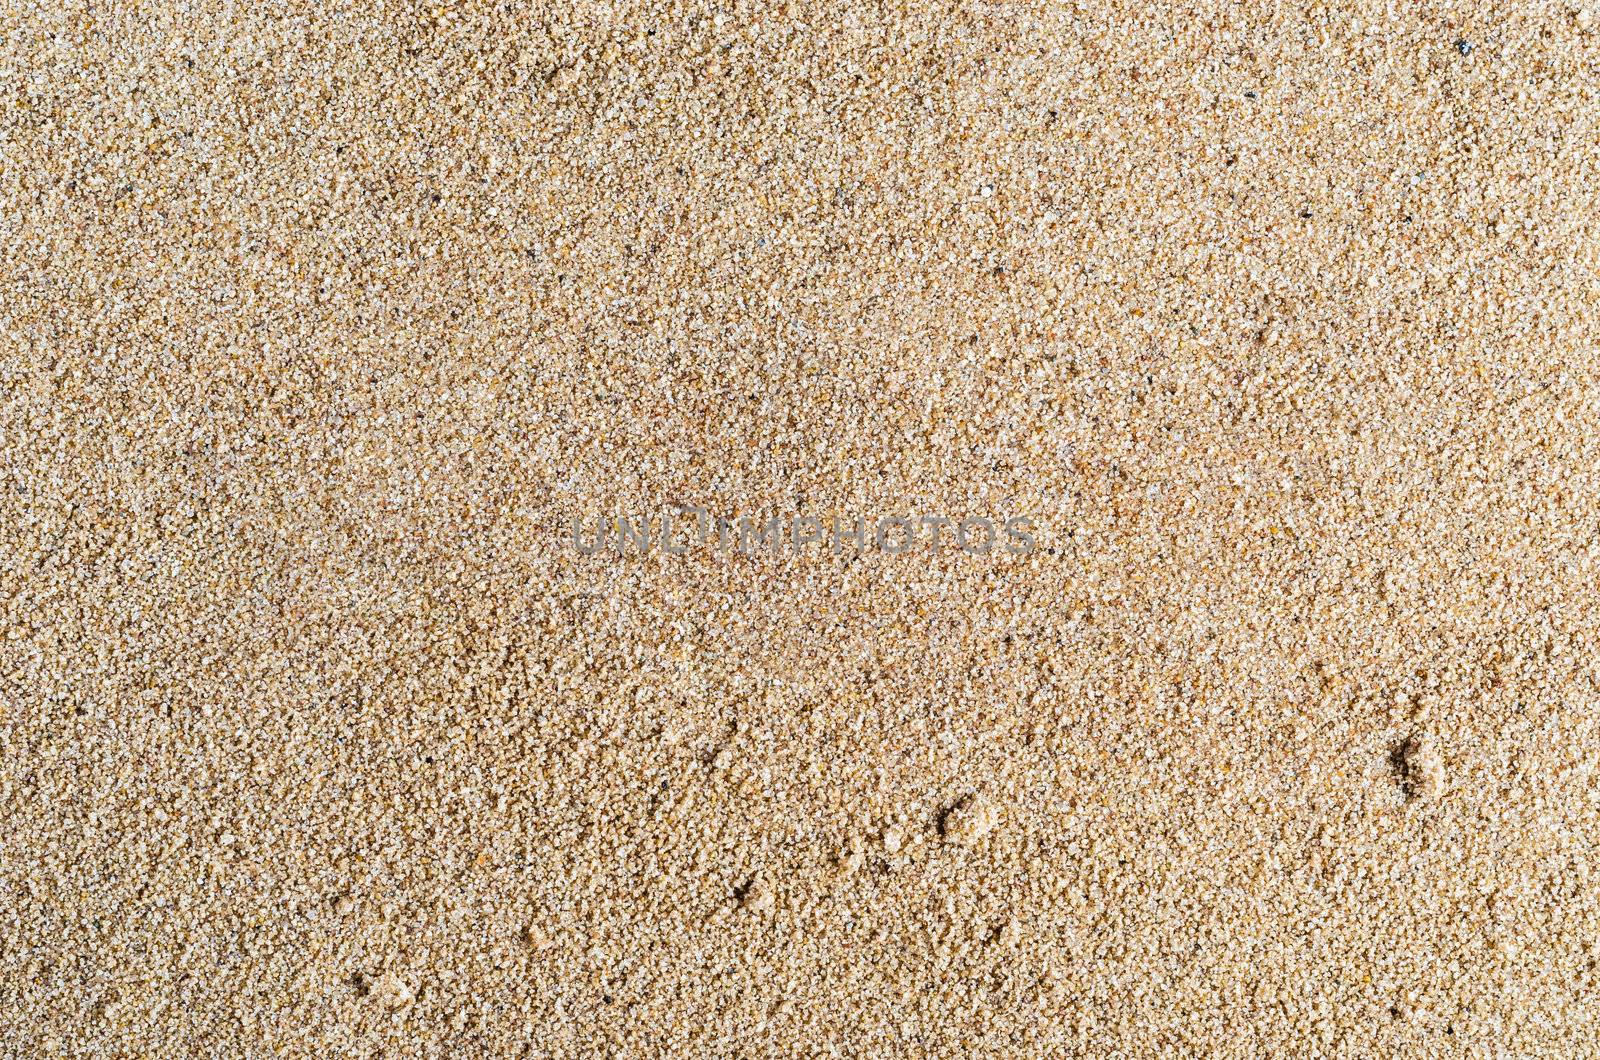 Unrefined Sand Texture by frannyanne